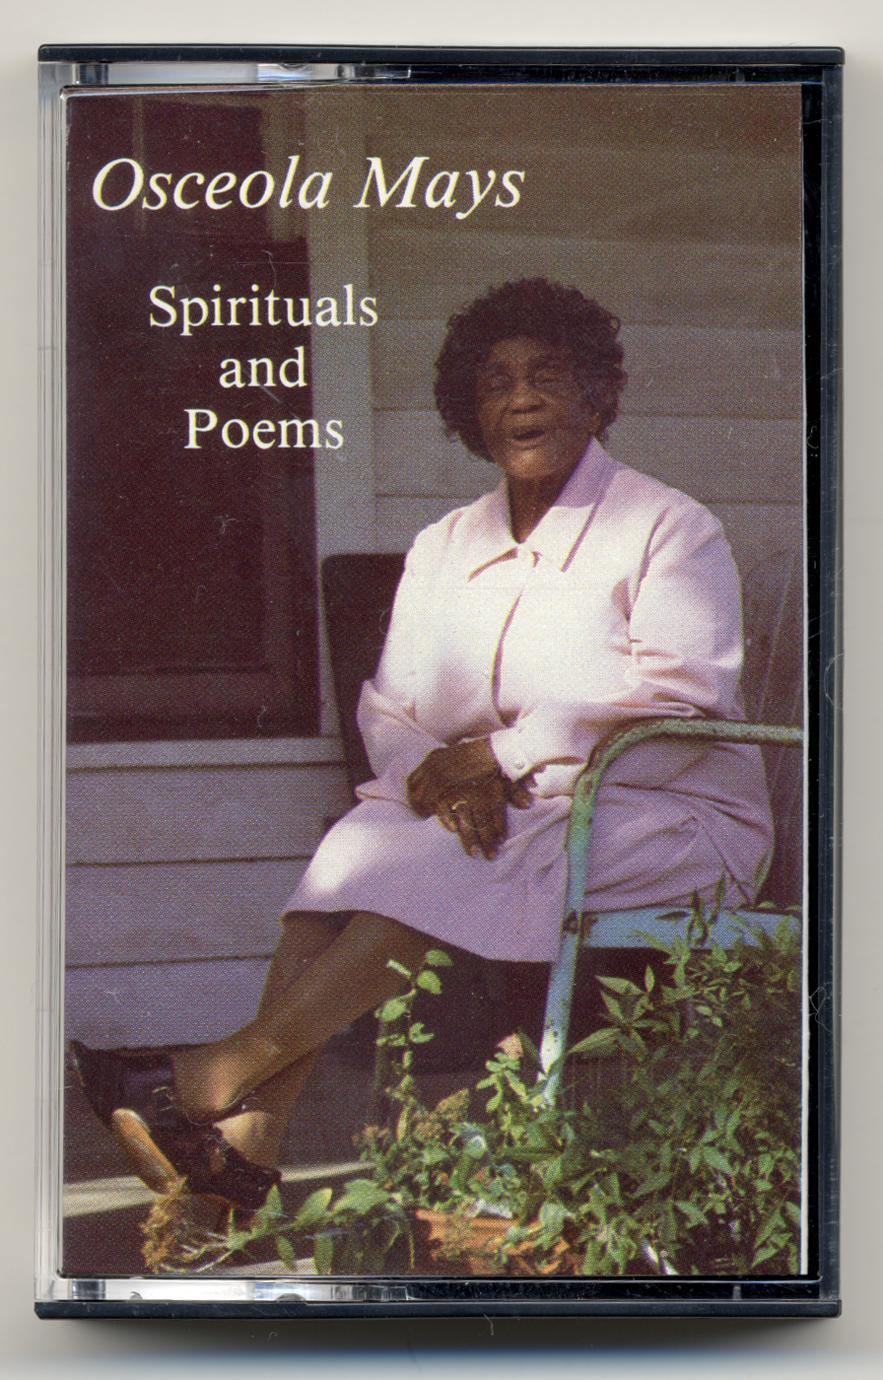 The life and poems of Osceola Mays (1 of 3)